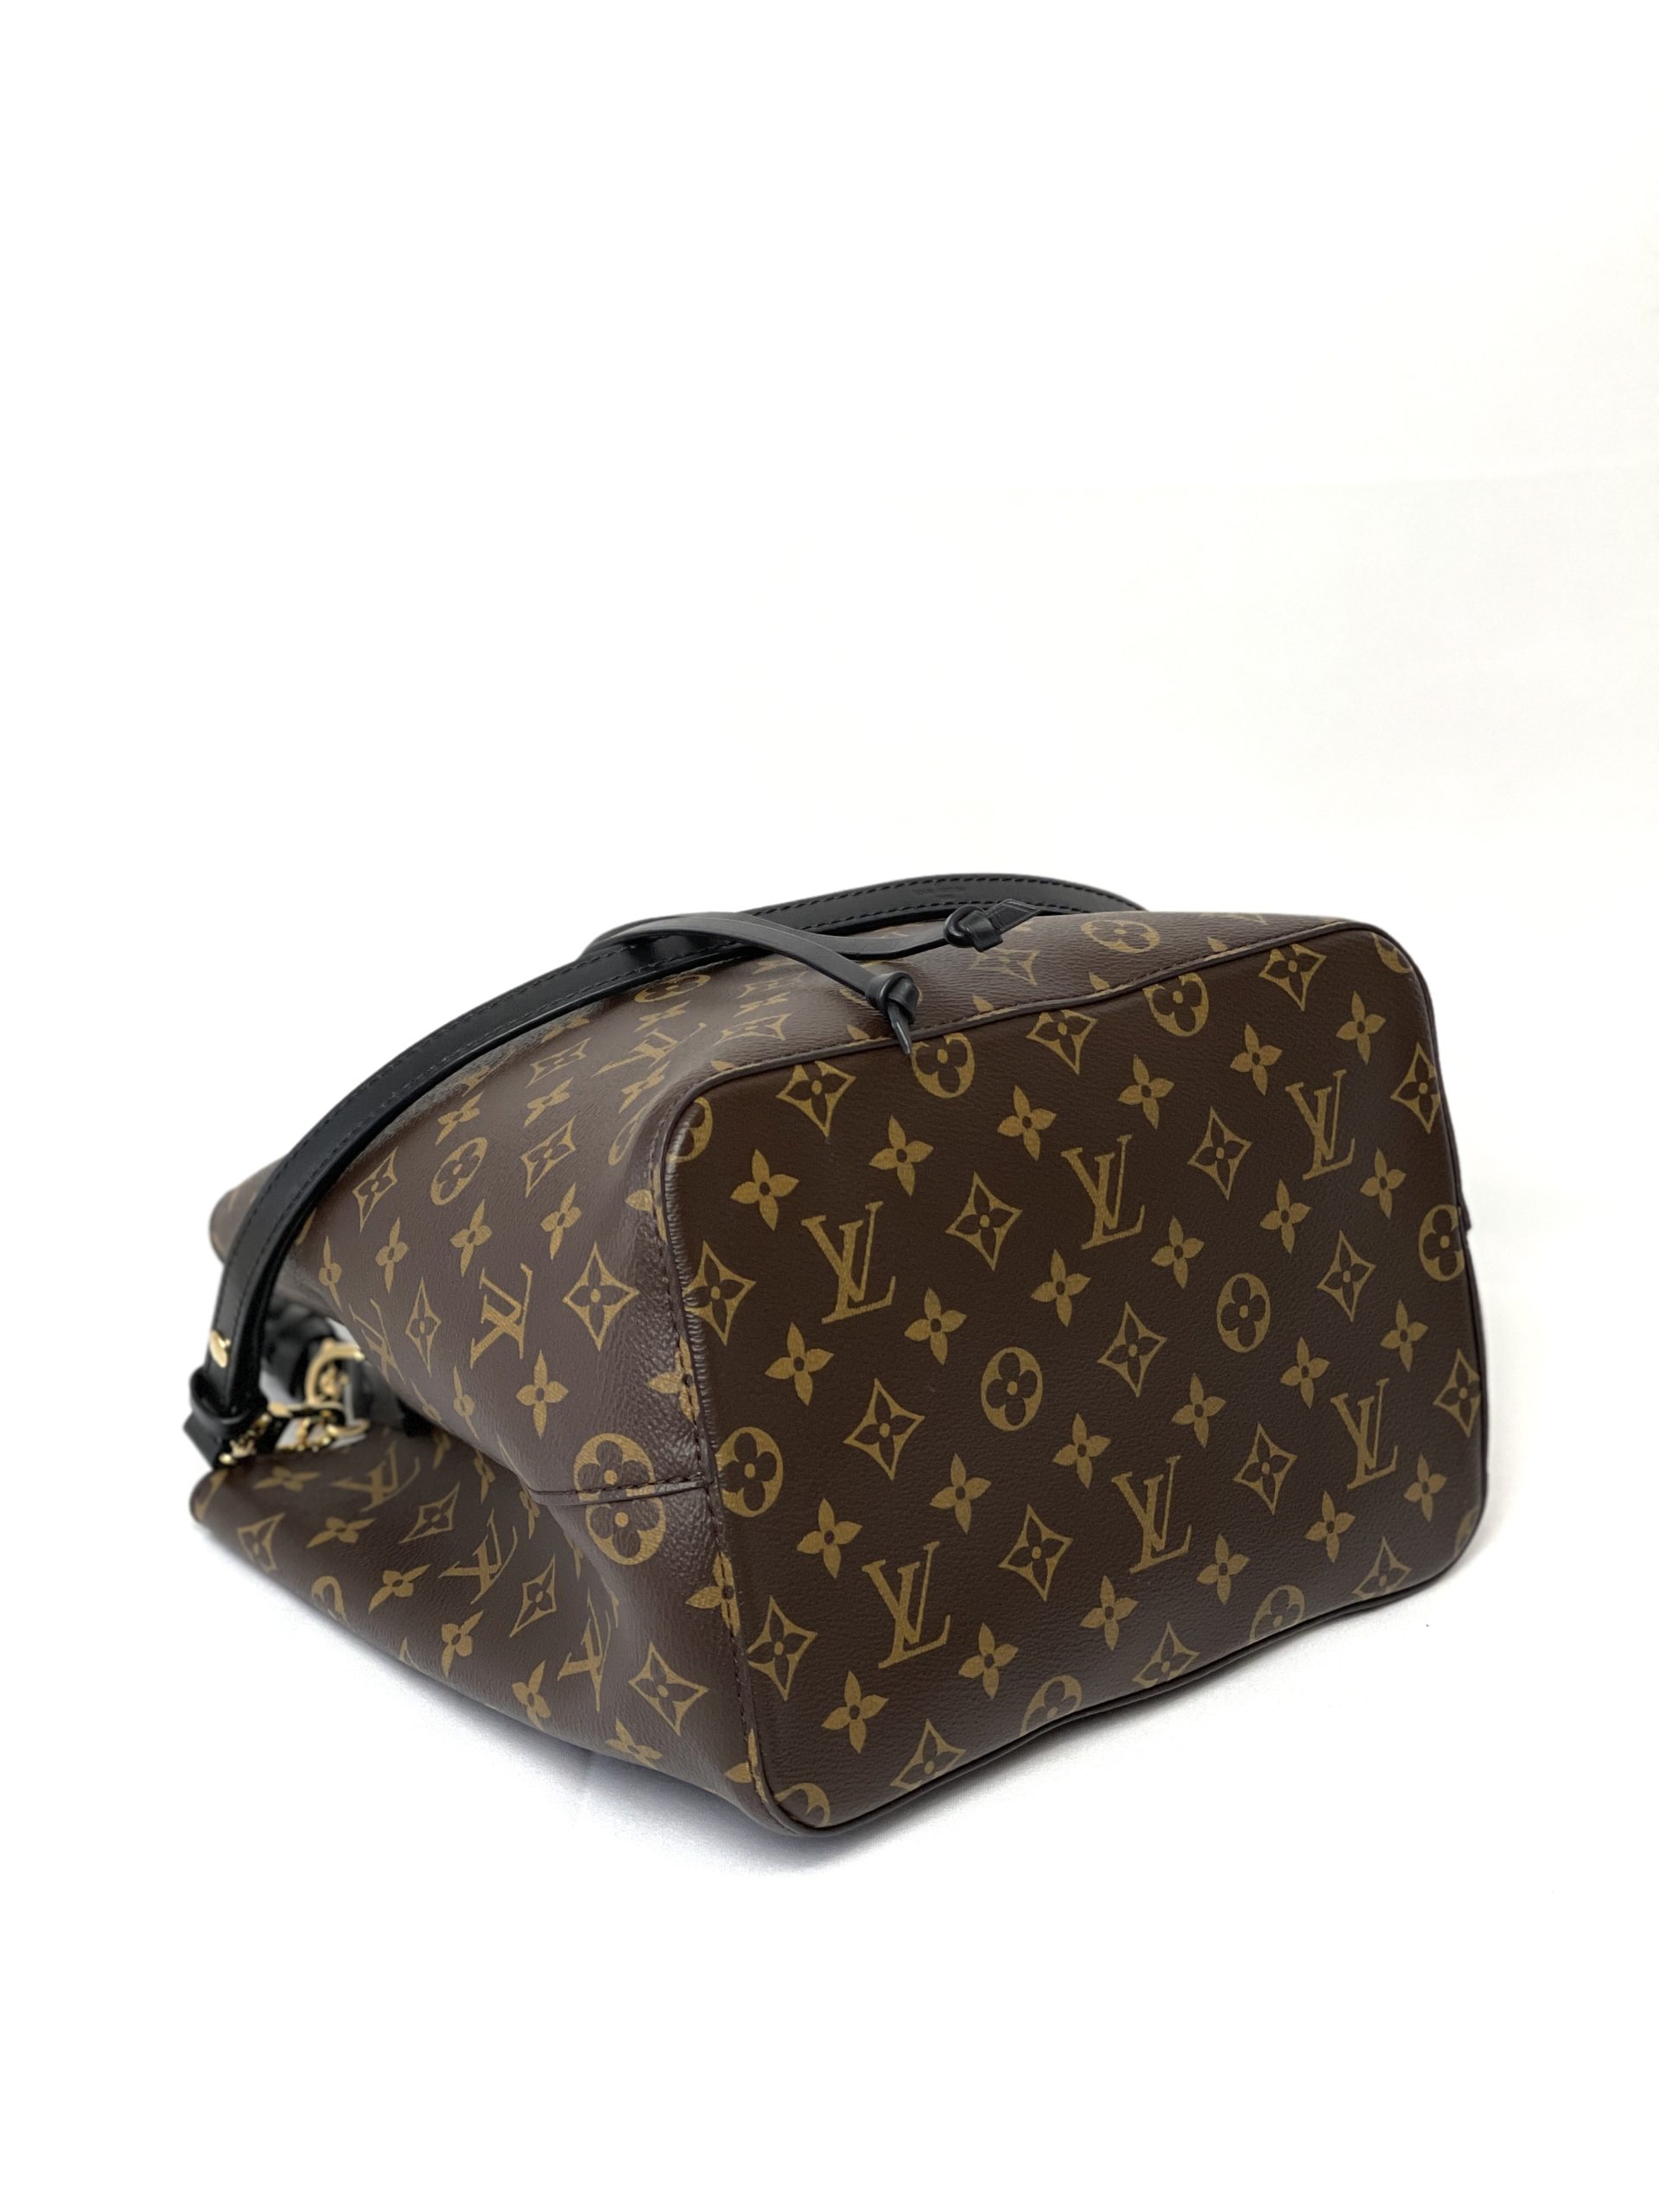 Lv NeoNoe Monogram Noir Comes with dust bag, copy of the receipt, two grey  custom made inserts and custom made Non LV Braided Handle Bag is…